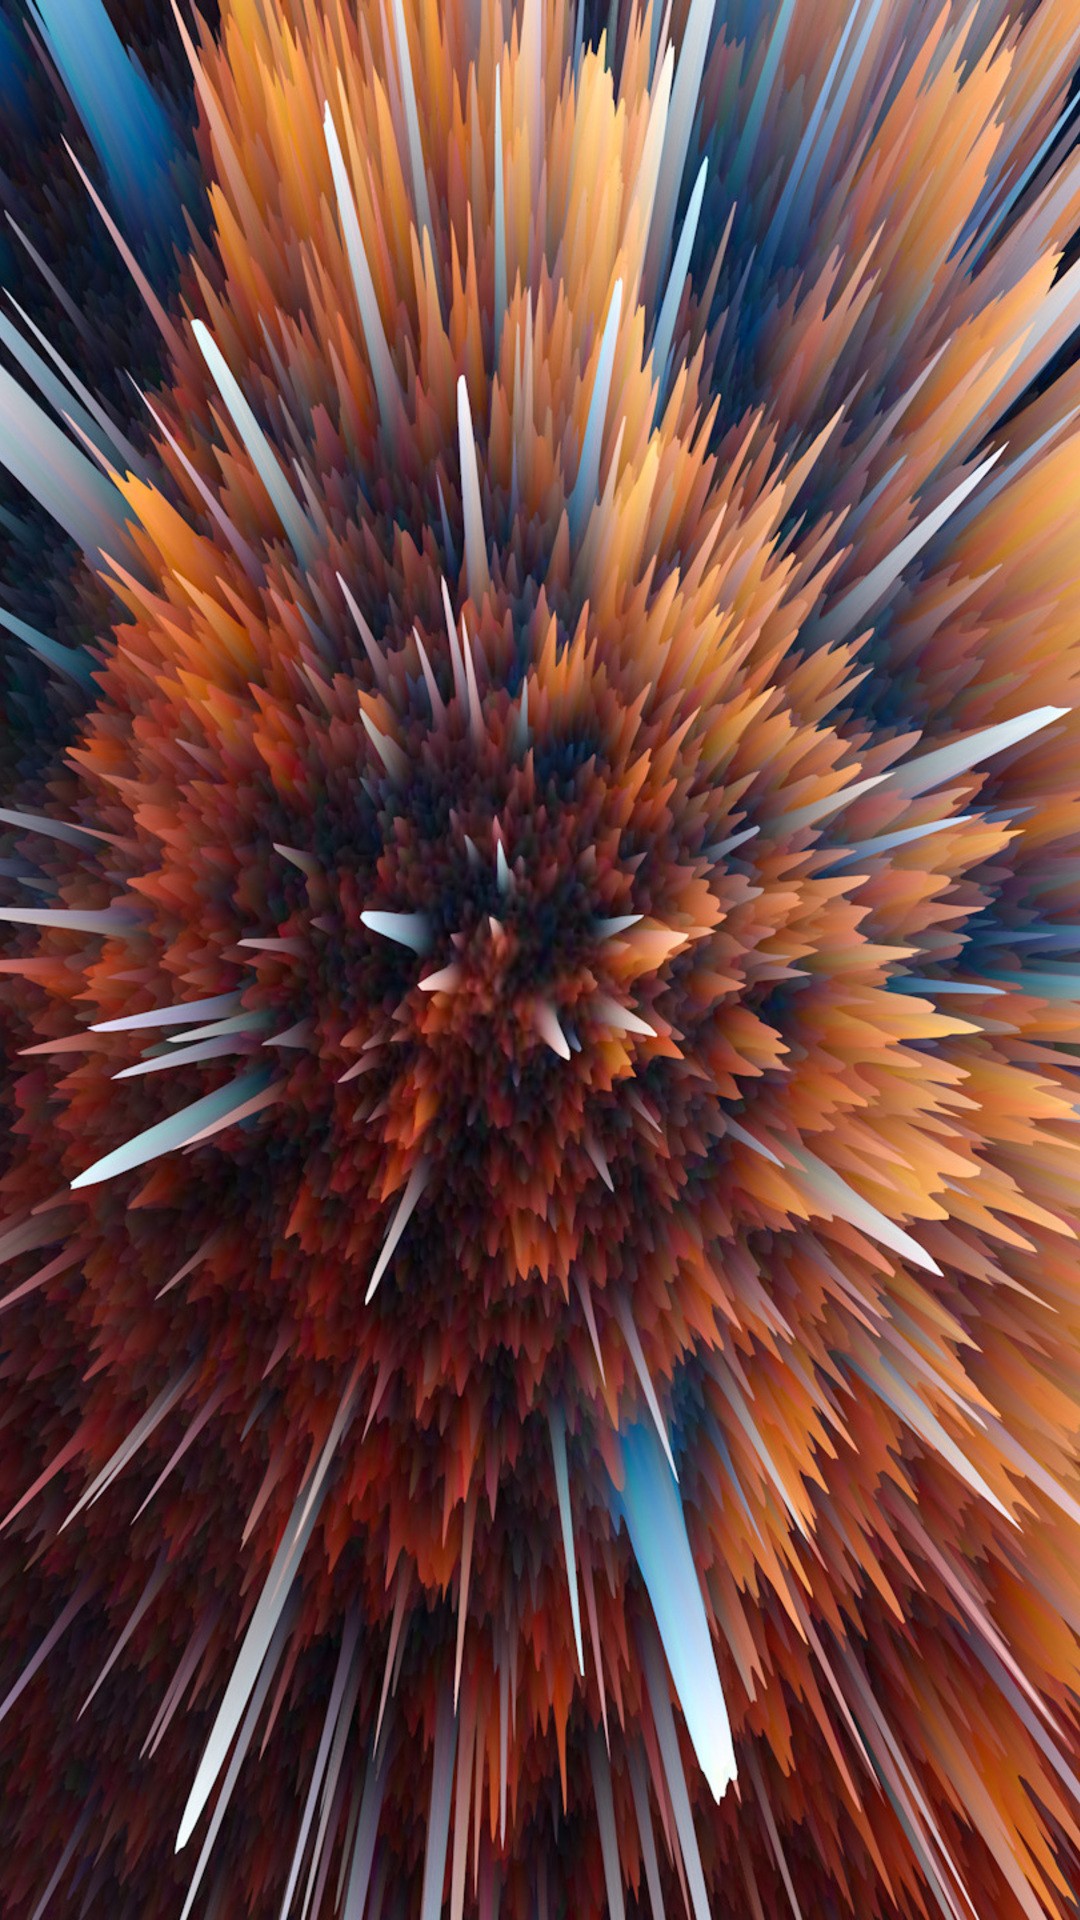 Particles Abstract Dr Wallpaper - Particle Explosion - HD Wallpaper 